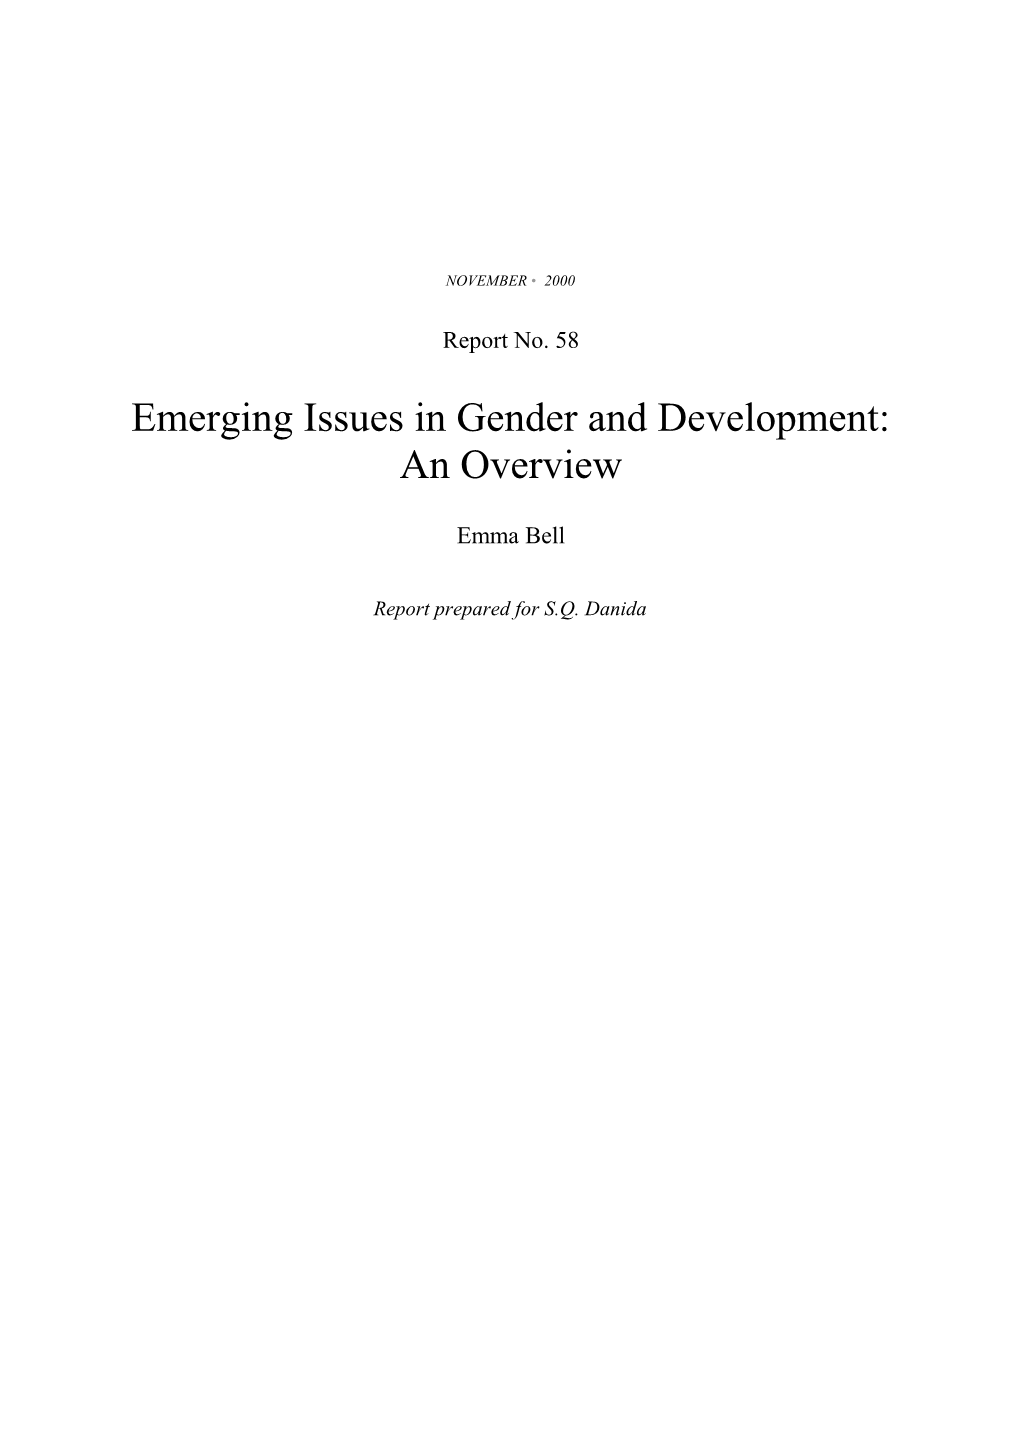 Emerging Issues in Gender and Development: an Overview